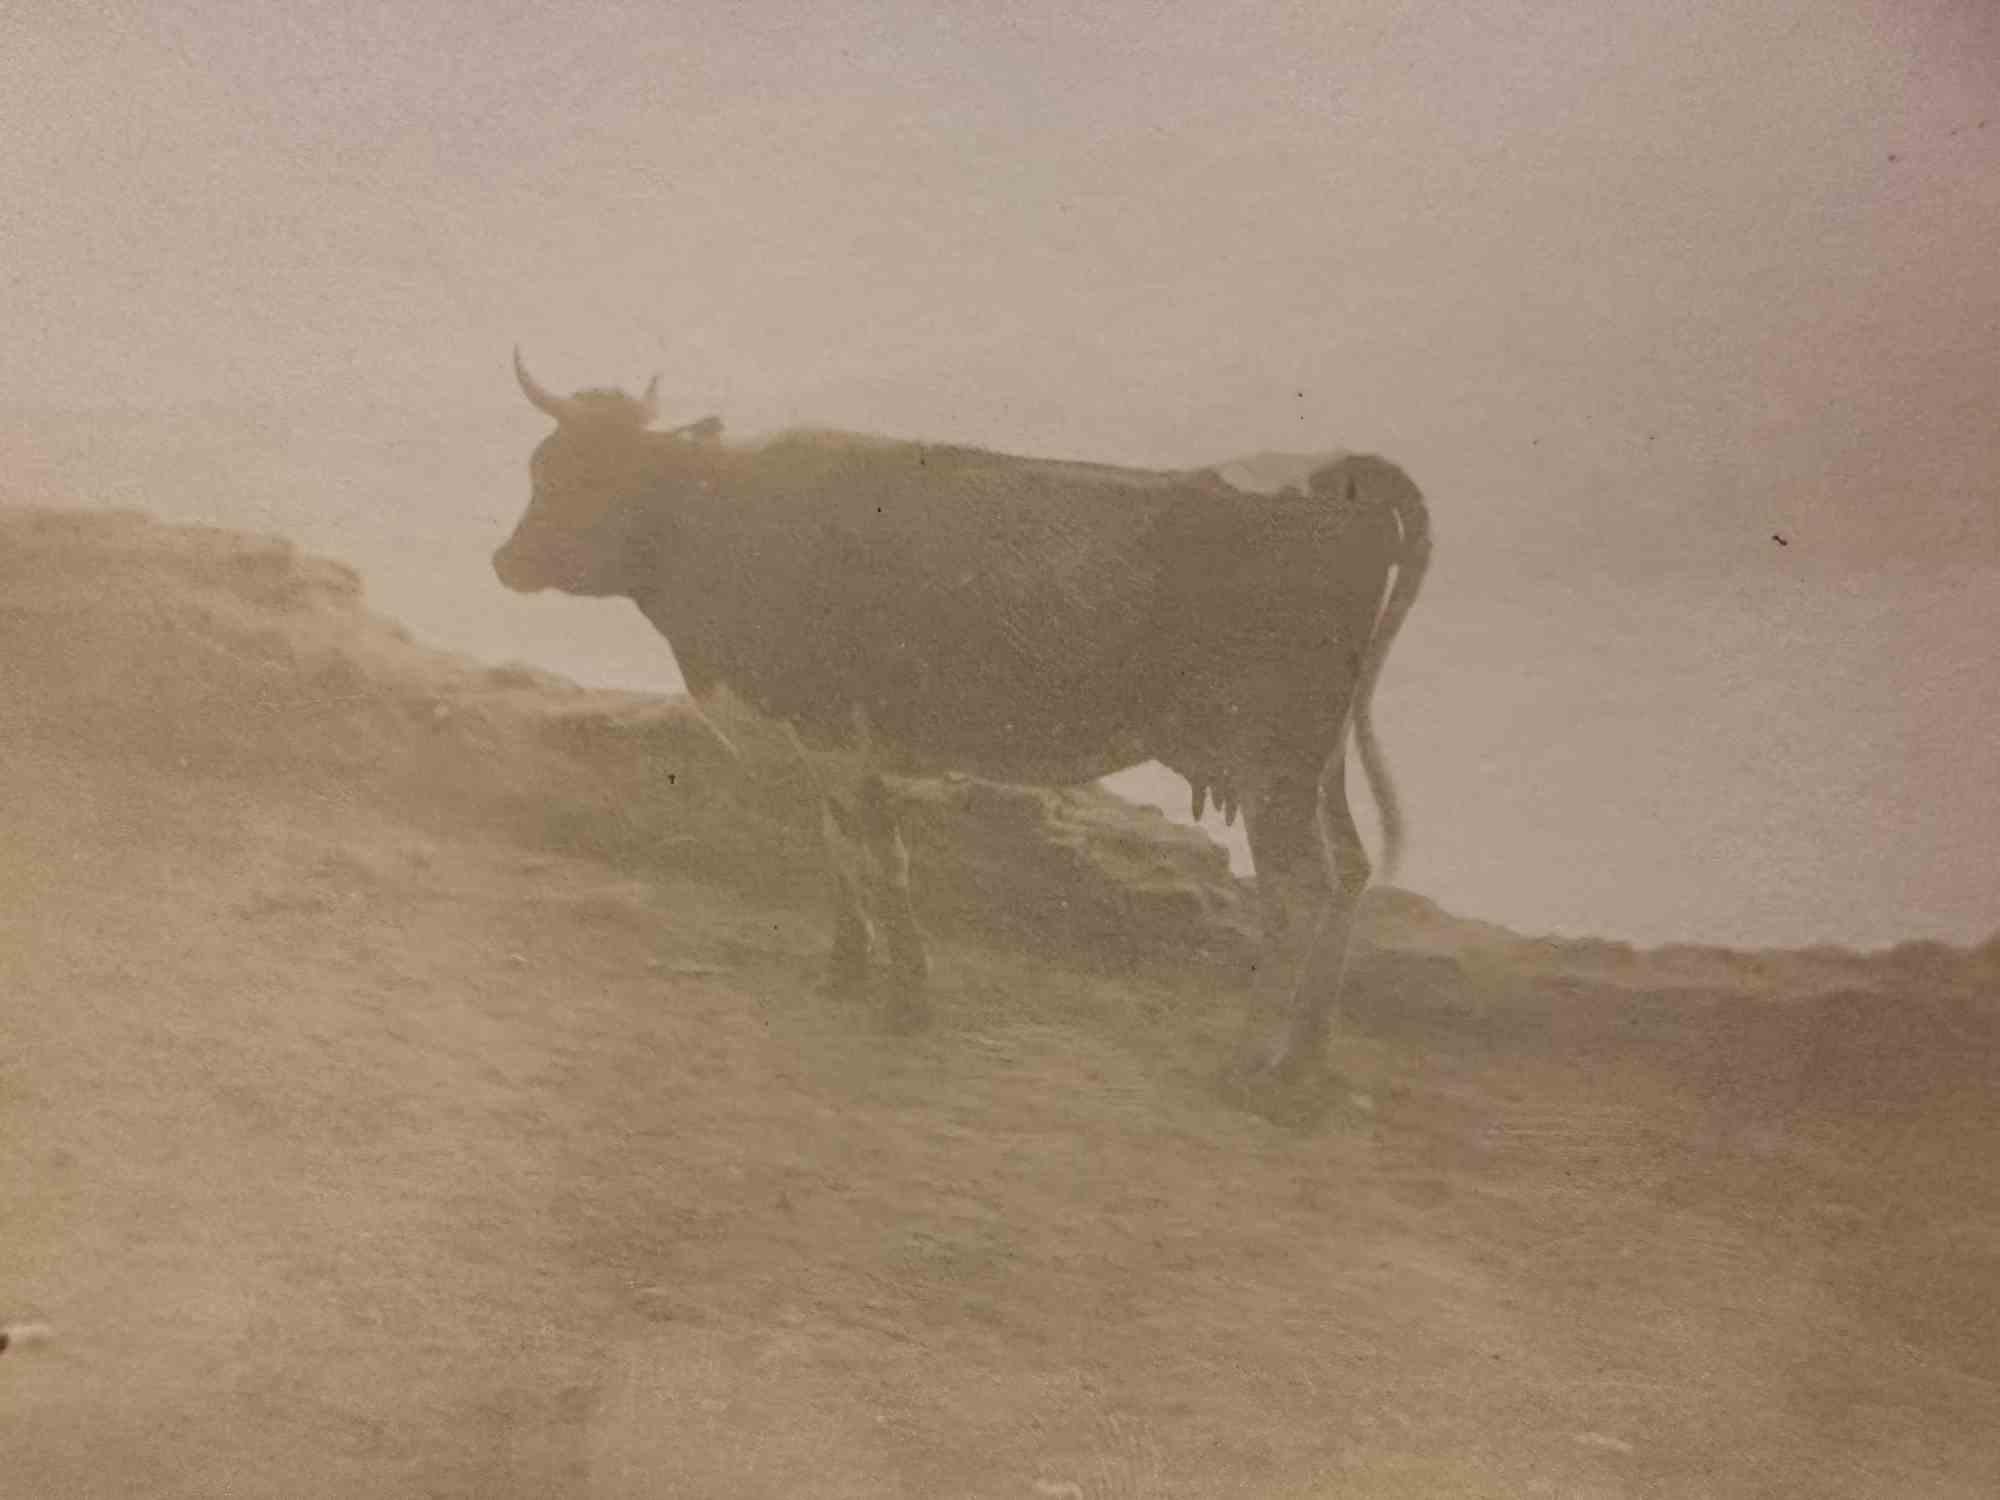 Unknown Figurative Photograph - The Old Days Photo - Cow in the Maremma (Tuscany) - Early 20th Century